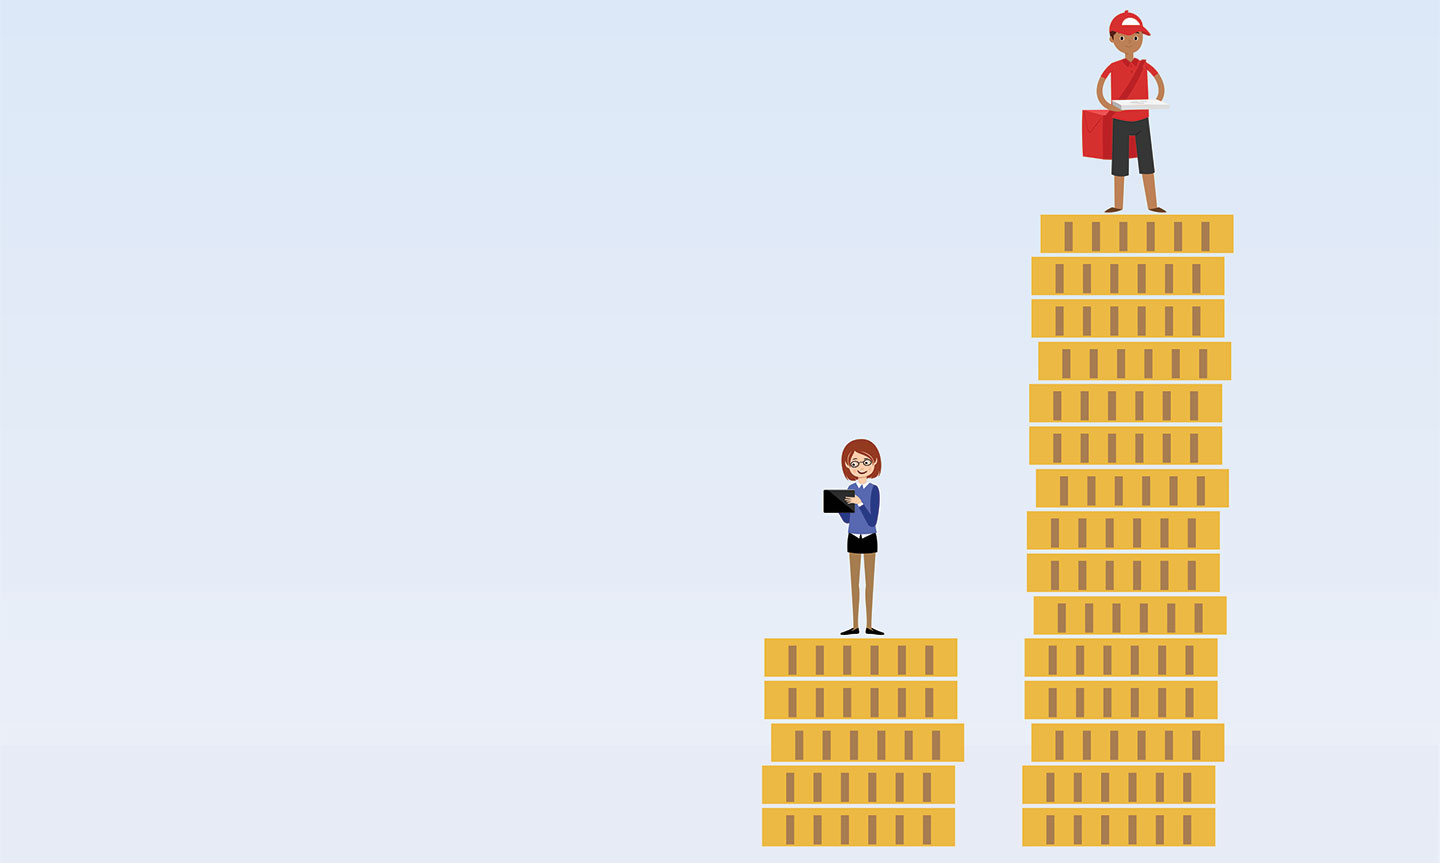 Cartoon characters standing on coins. Male cartoon character standing on taller pile of coins.